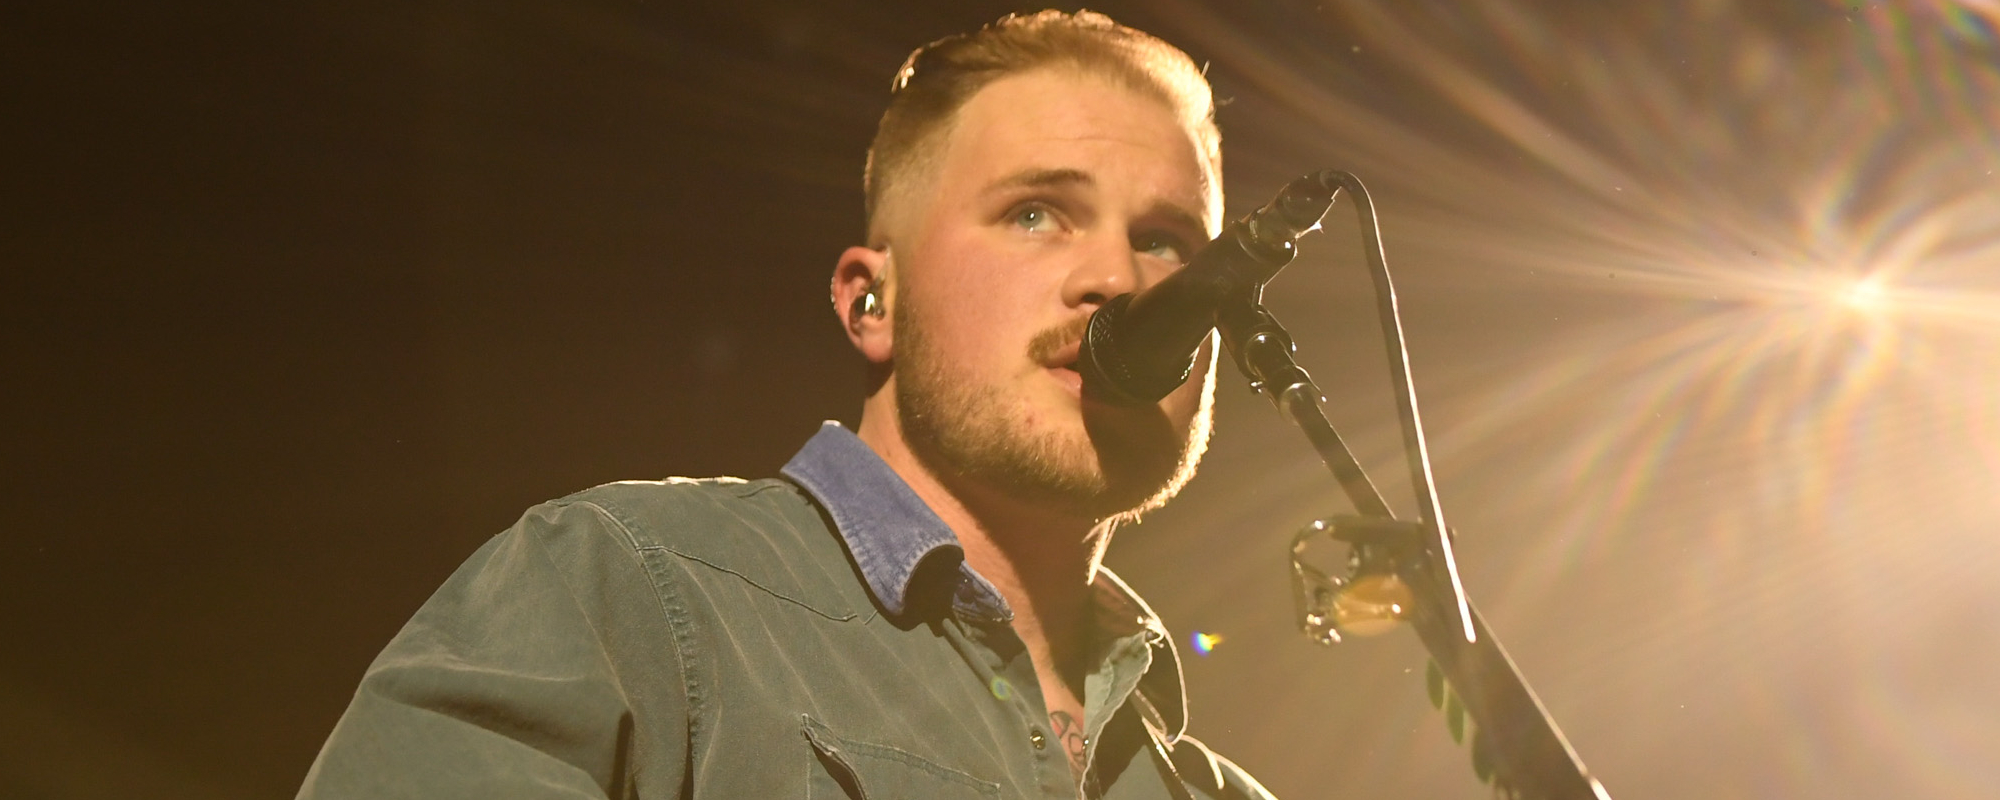 Zach Bryan Kicks off Quittin Time Tour With Special Kacey Musgraves Duet, Leaving Fans Stunned